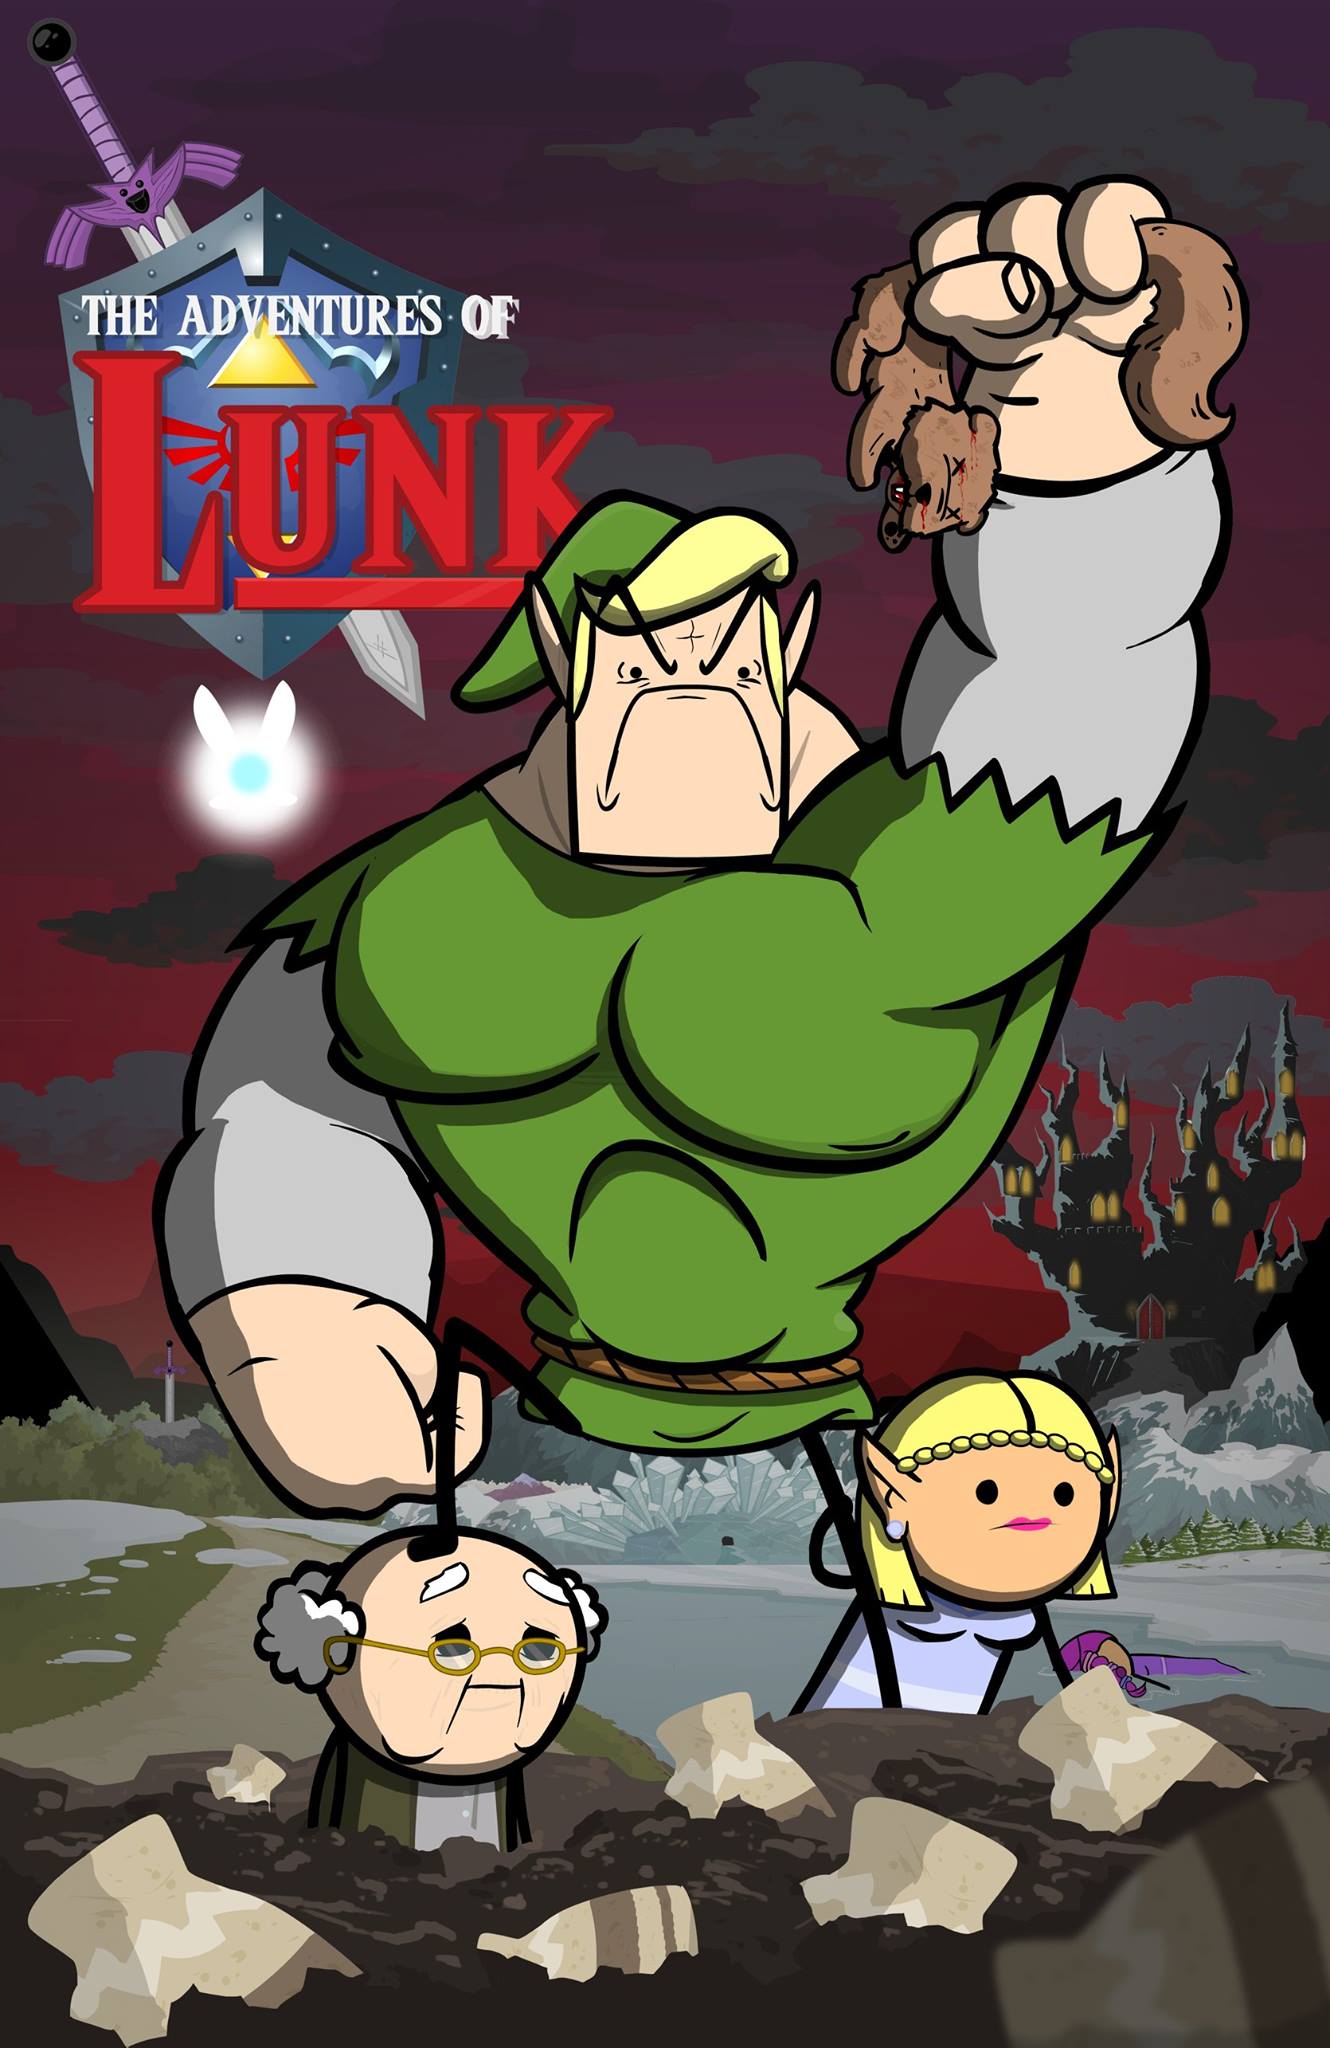 The Adventures of Lunk – Cyanide and Happiness